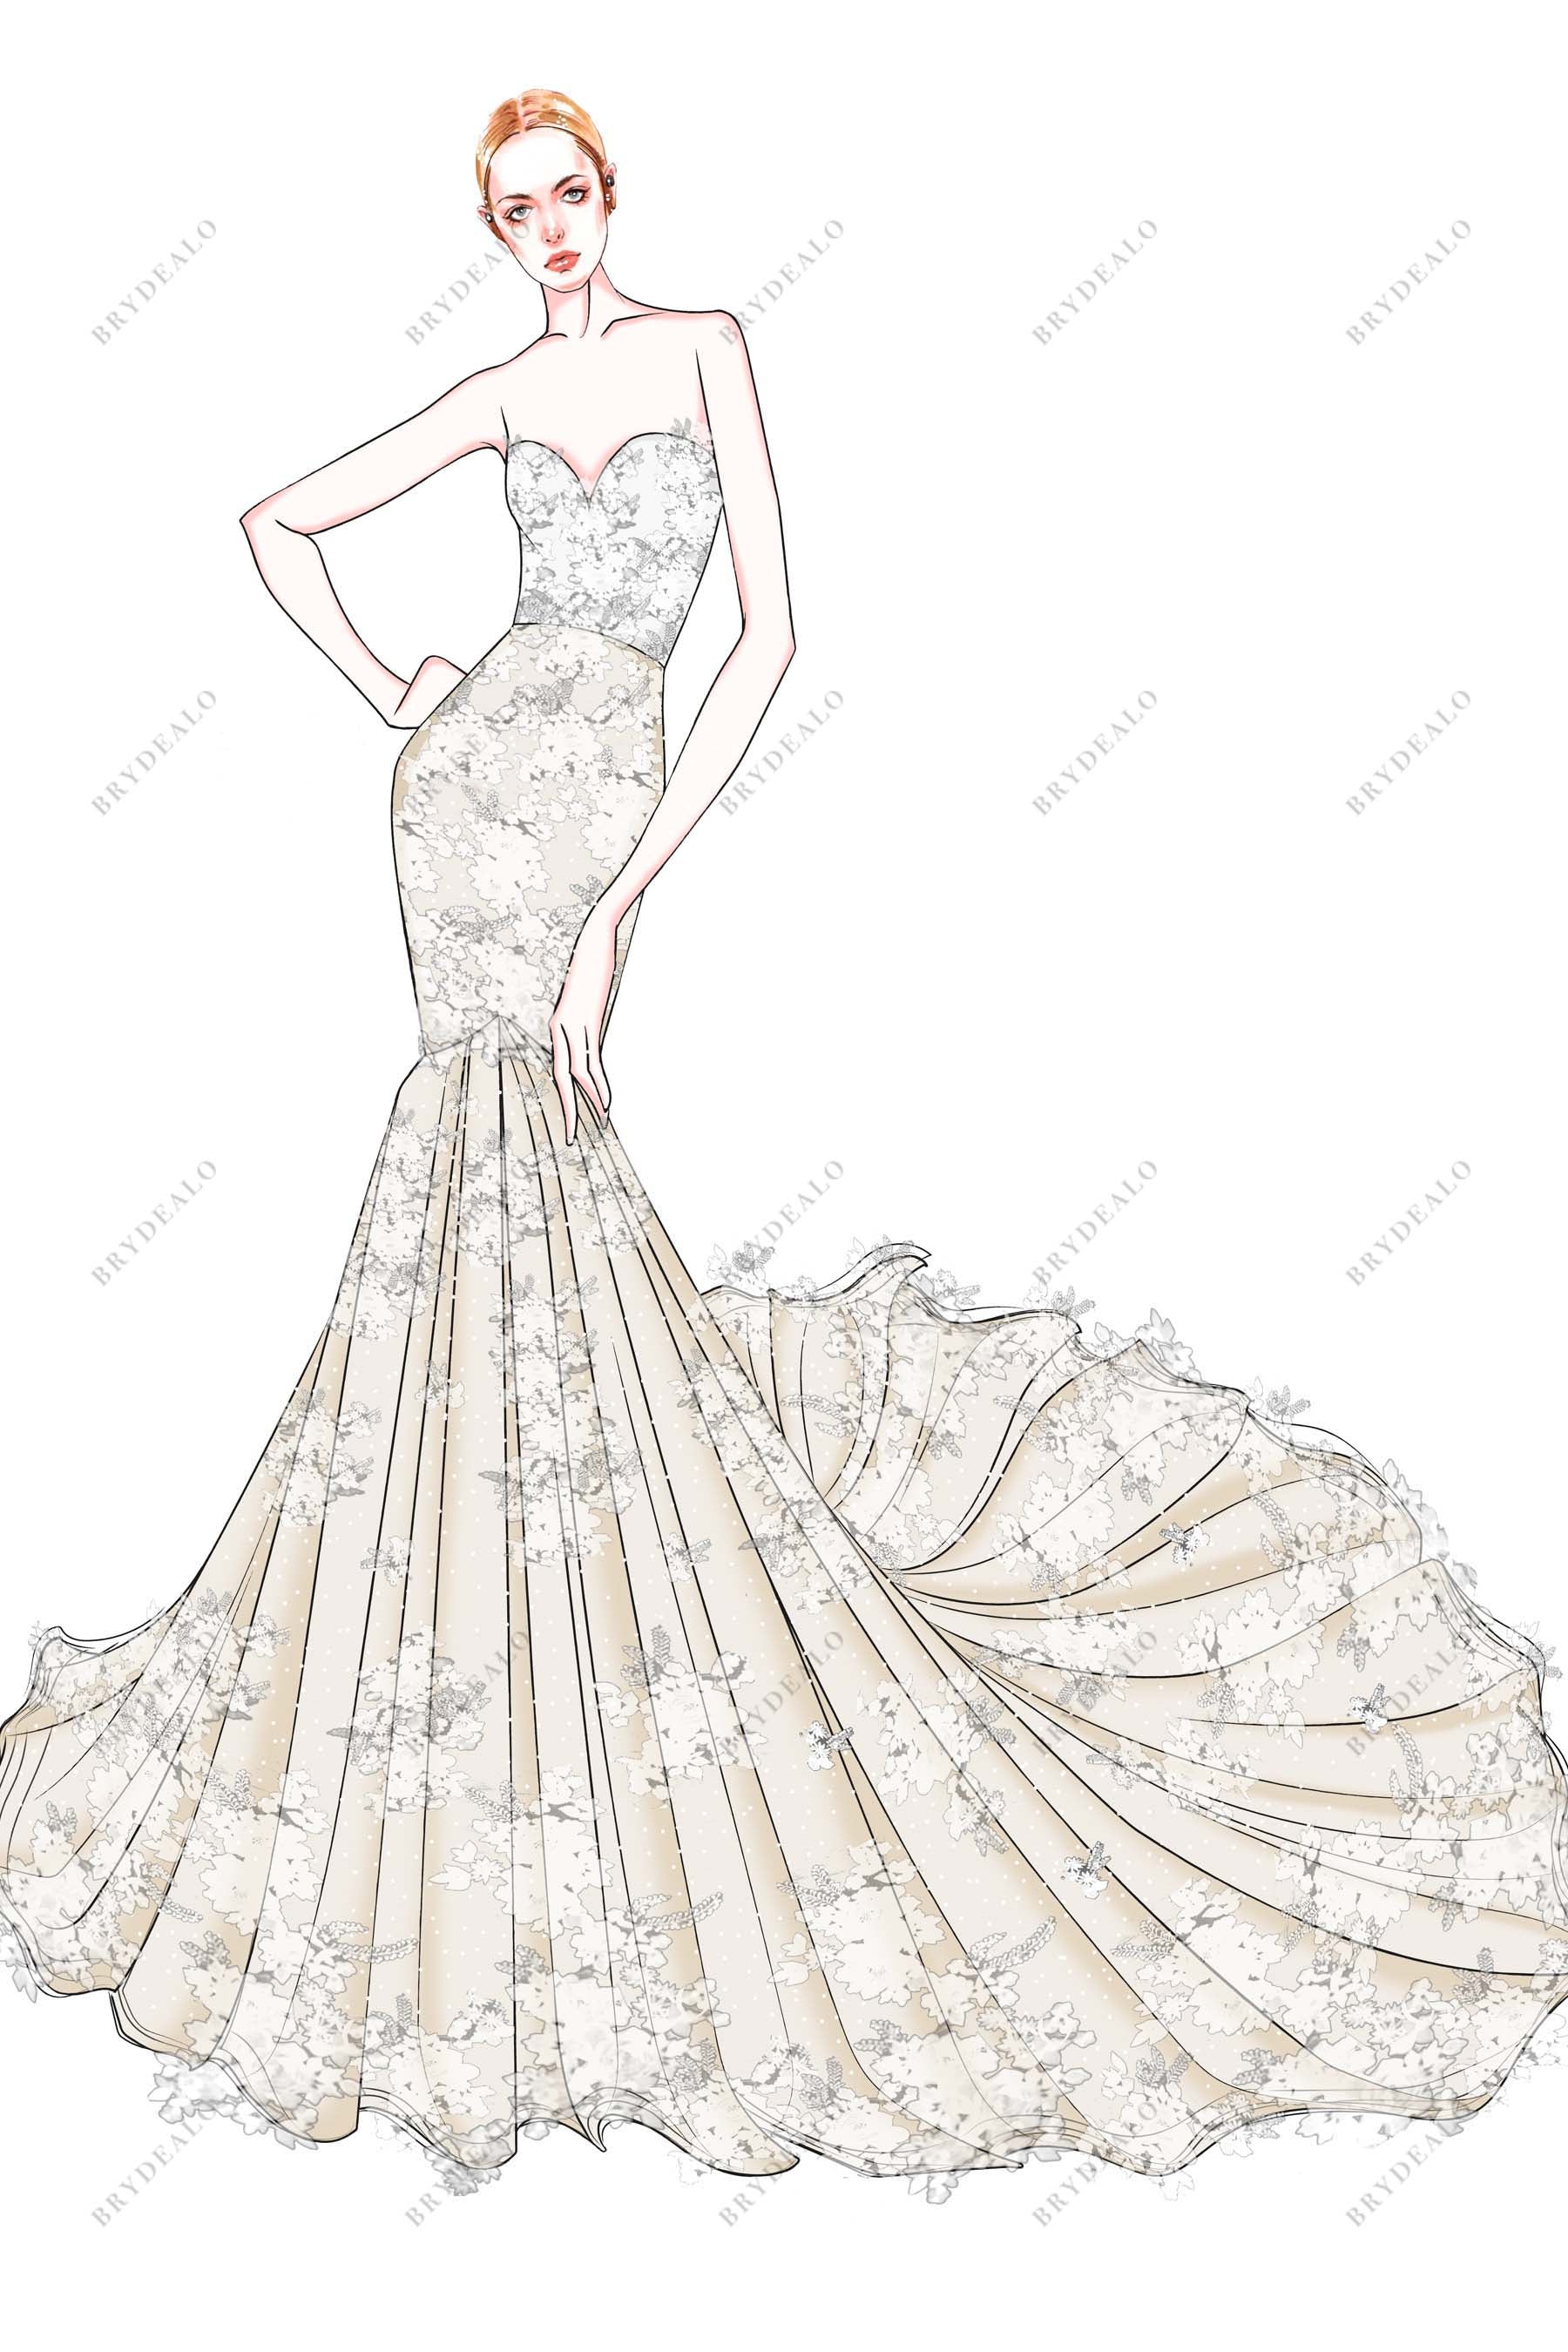 wedding dress drawings and designs